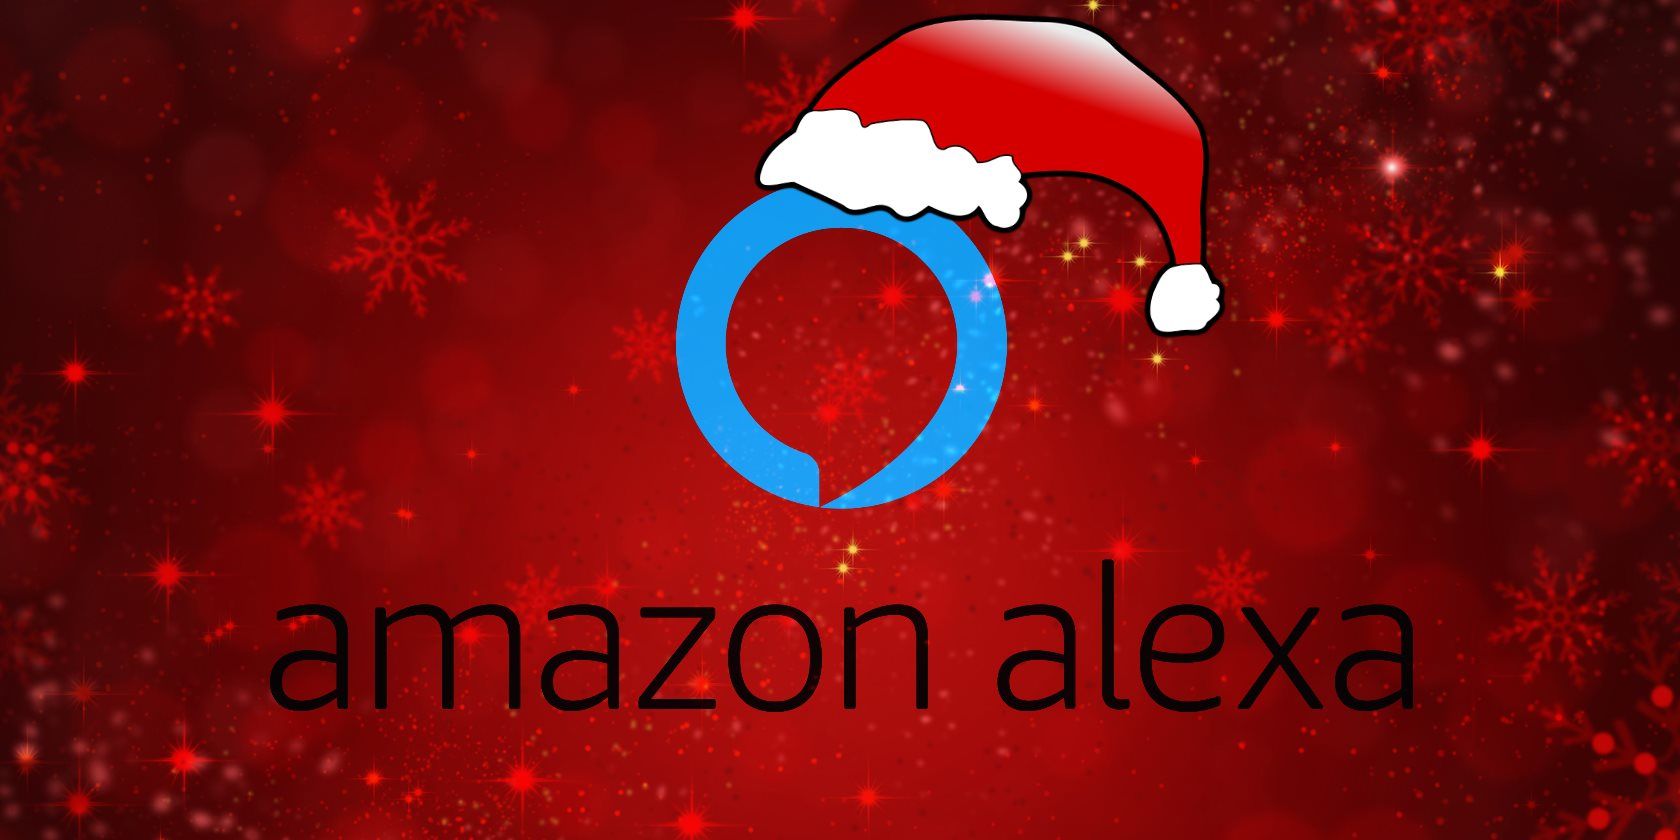 Why You Need Amazon Alexa in Your Home This Christmas